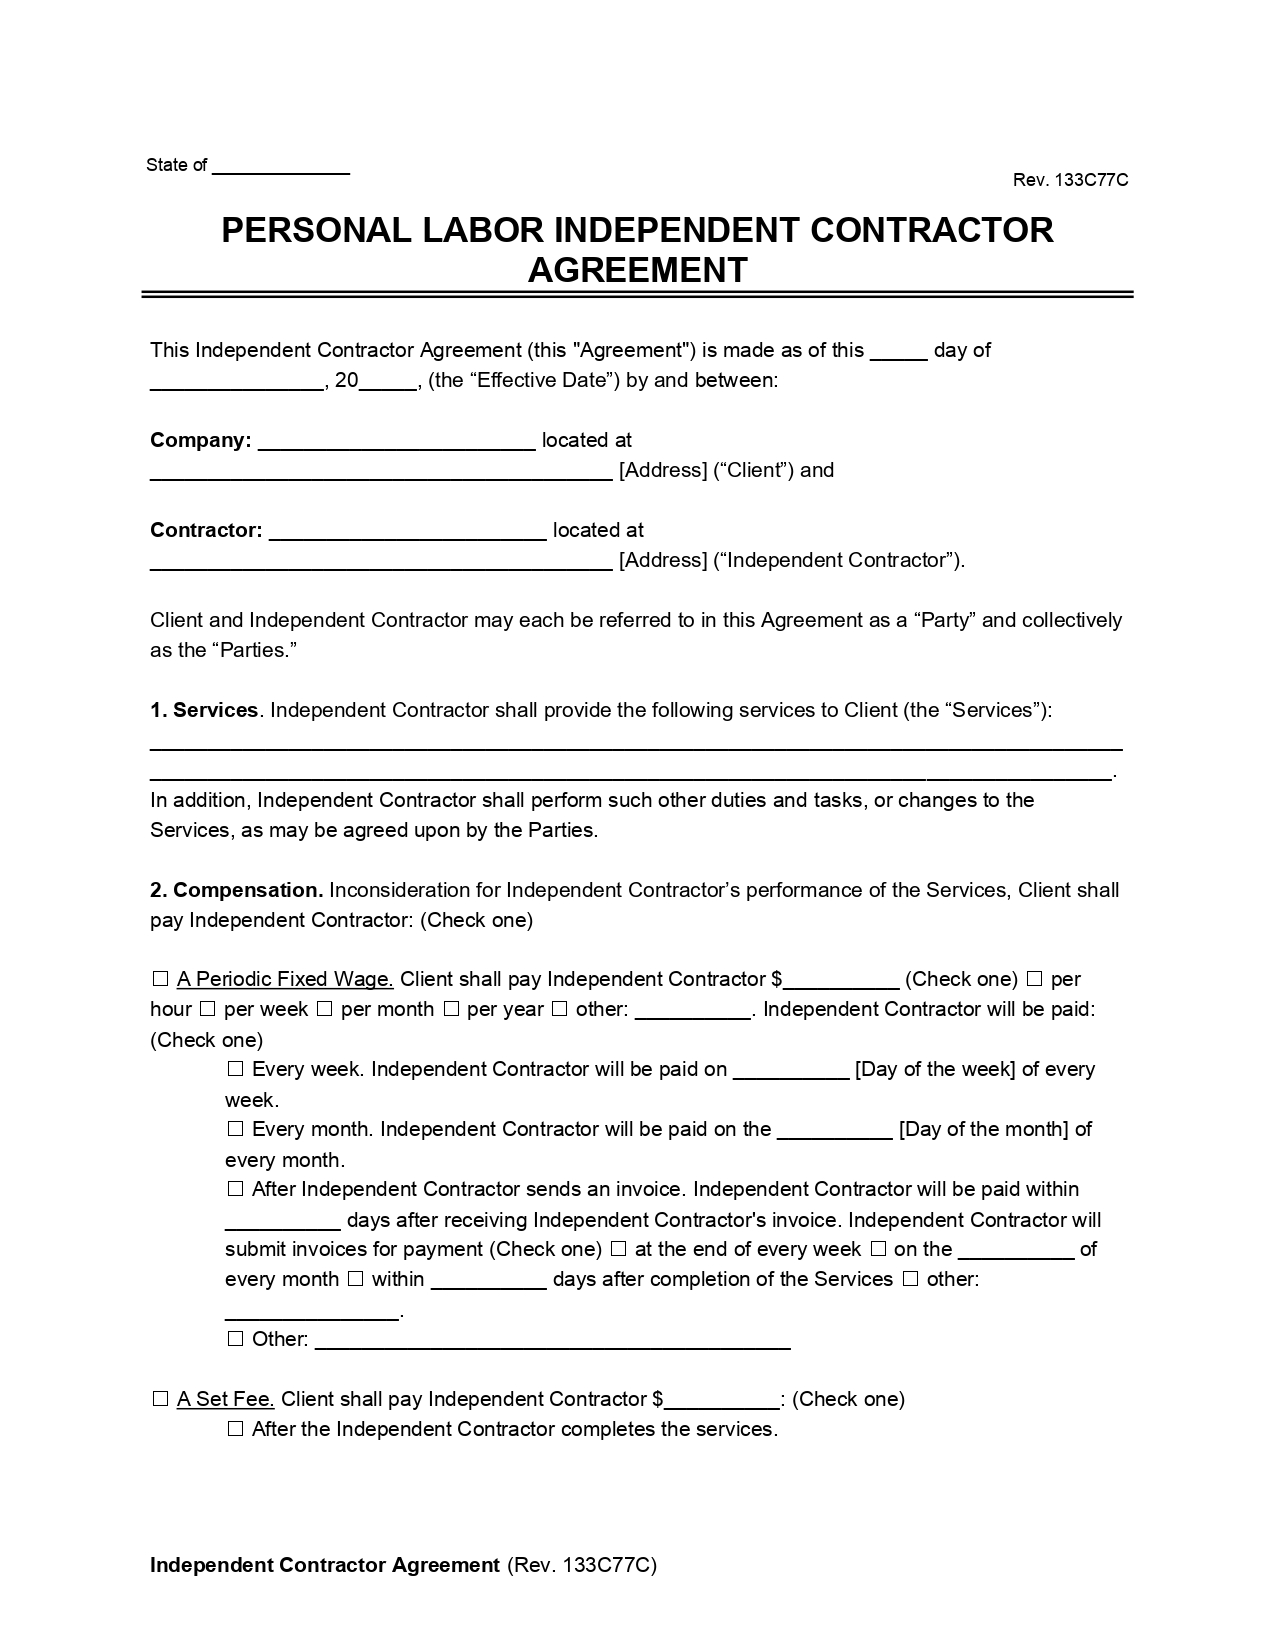 Personal Labor Independent Contractor Agreement